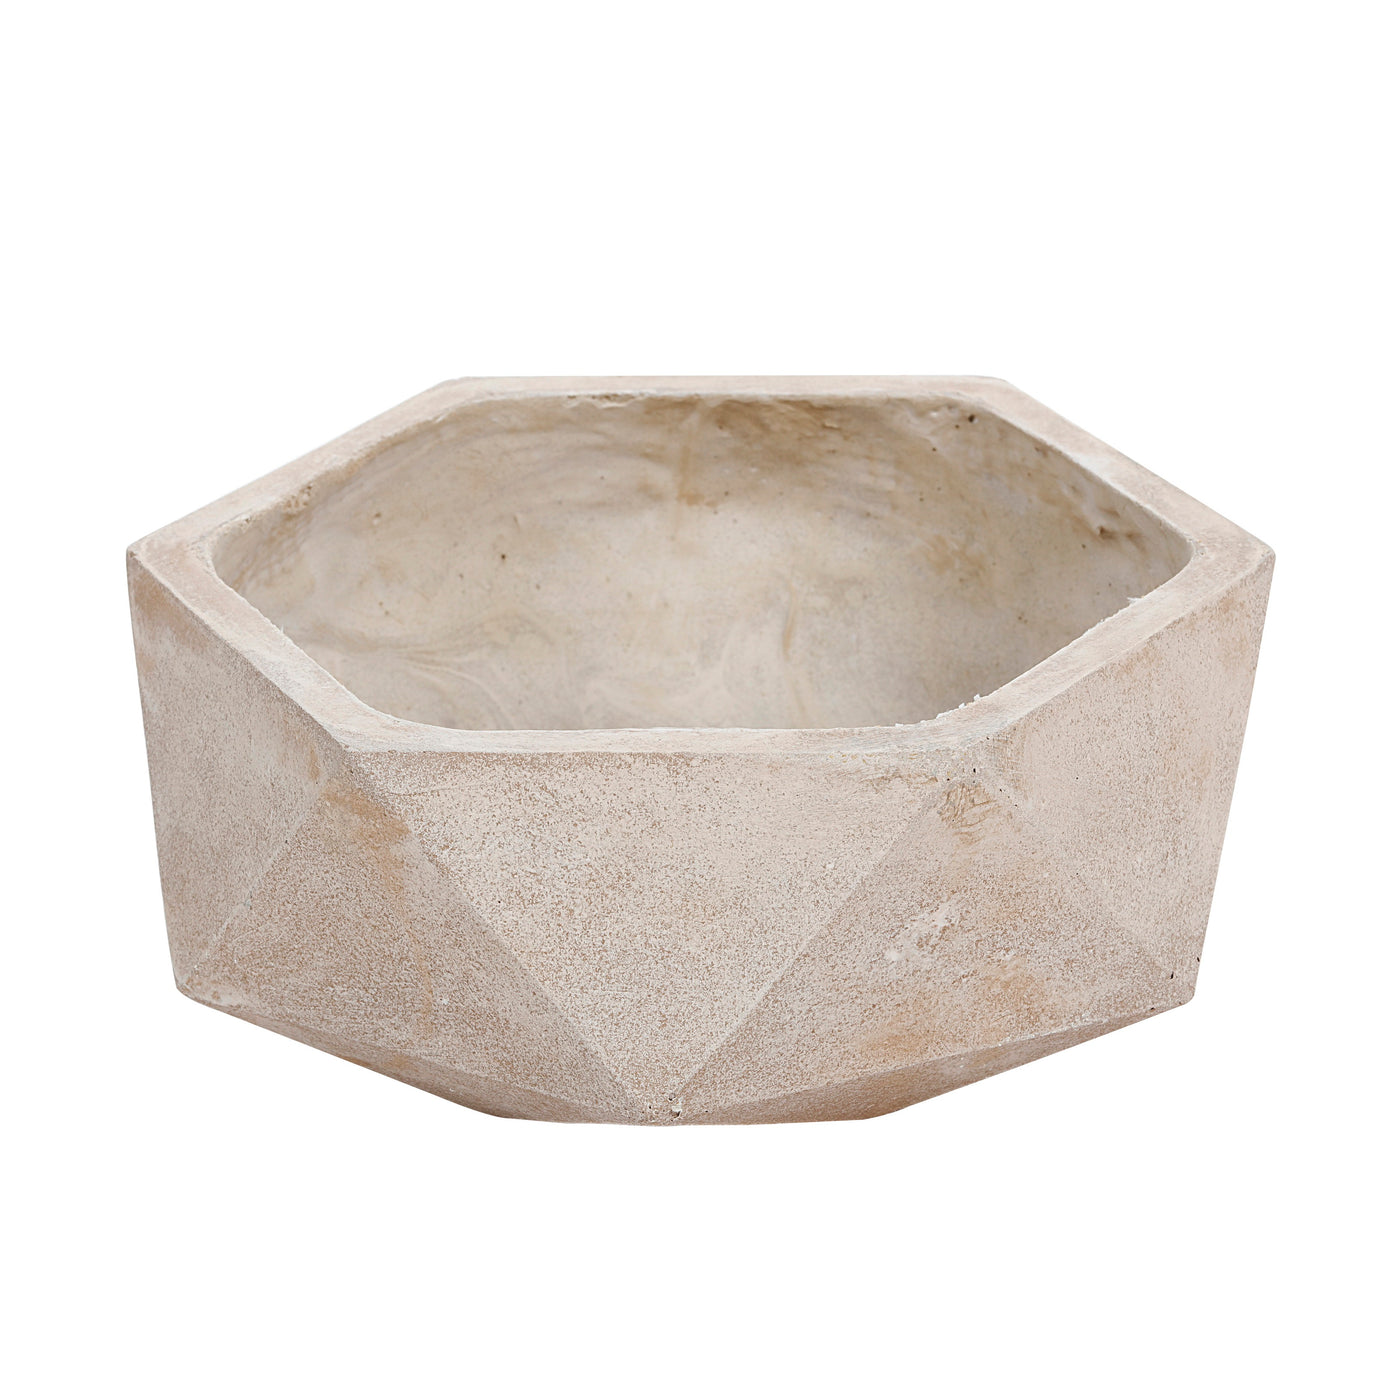 High-quality hexagonal stonecast pot in natural taupe